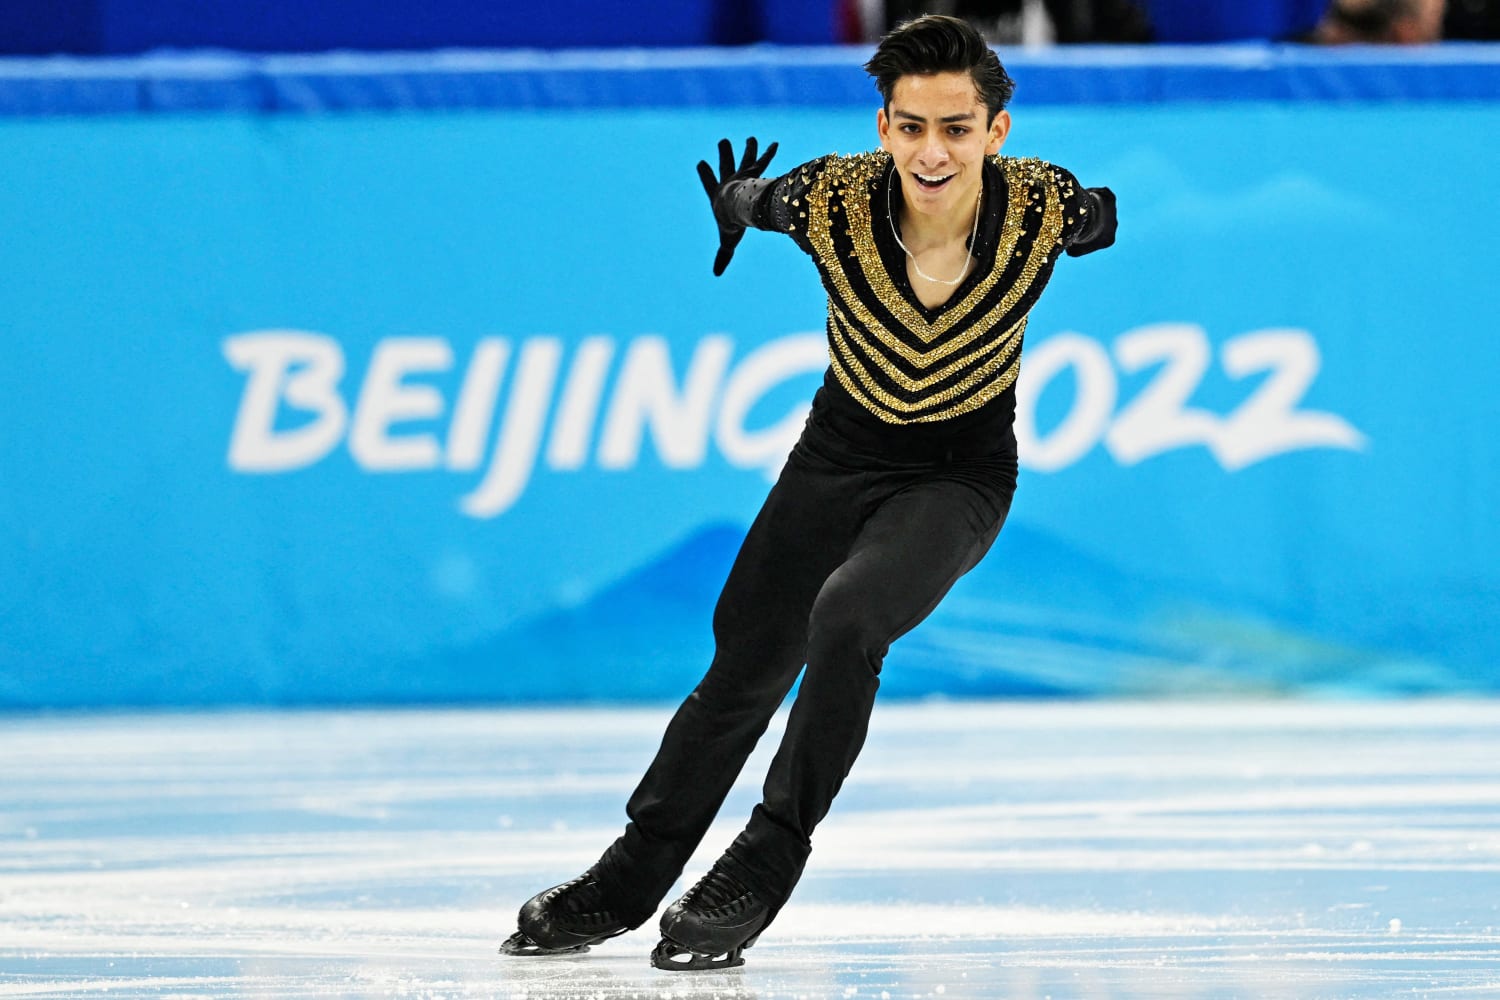 Mexican figure skater Donovan Carrillo achieves an Olympic first